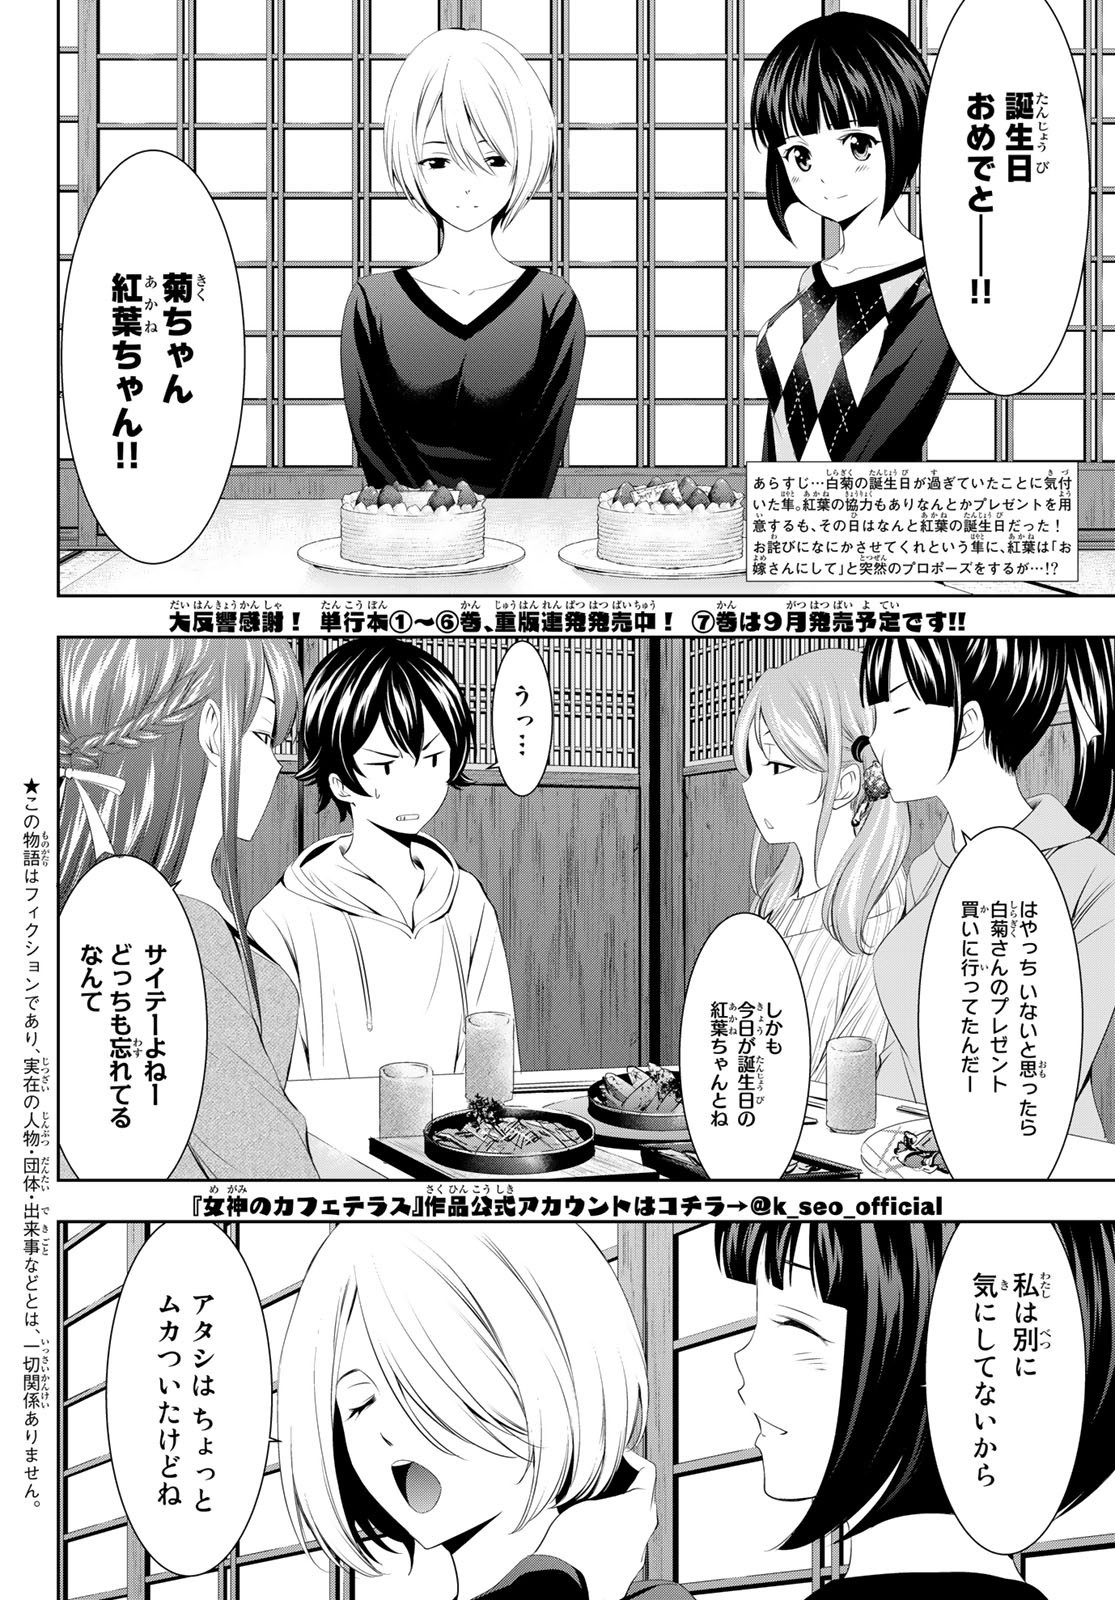 Goddess-Cafe-Terrace - Chapter 068 - Page 2